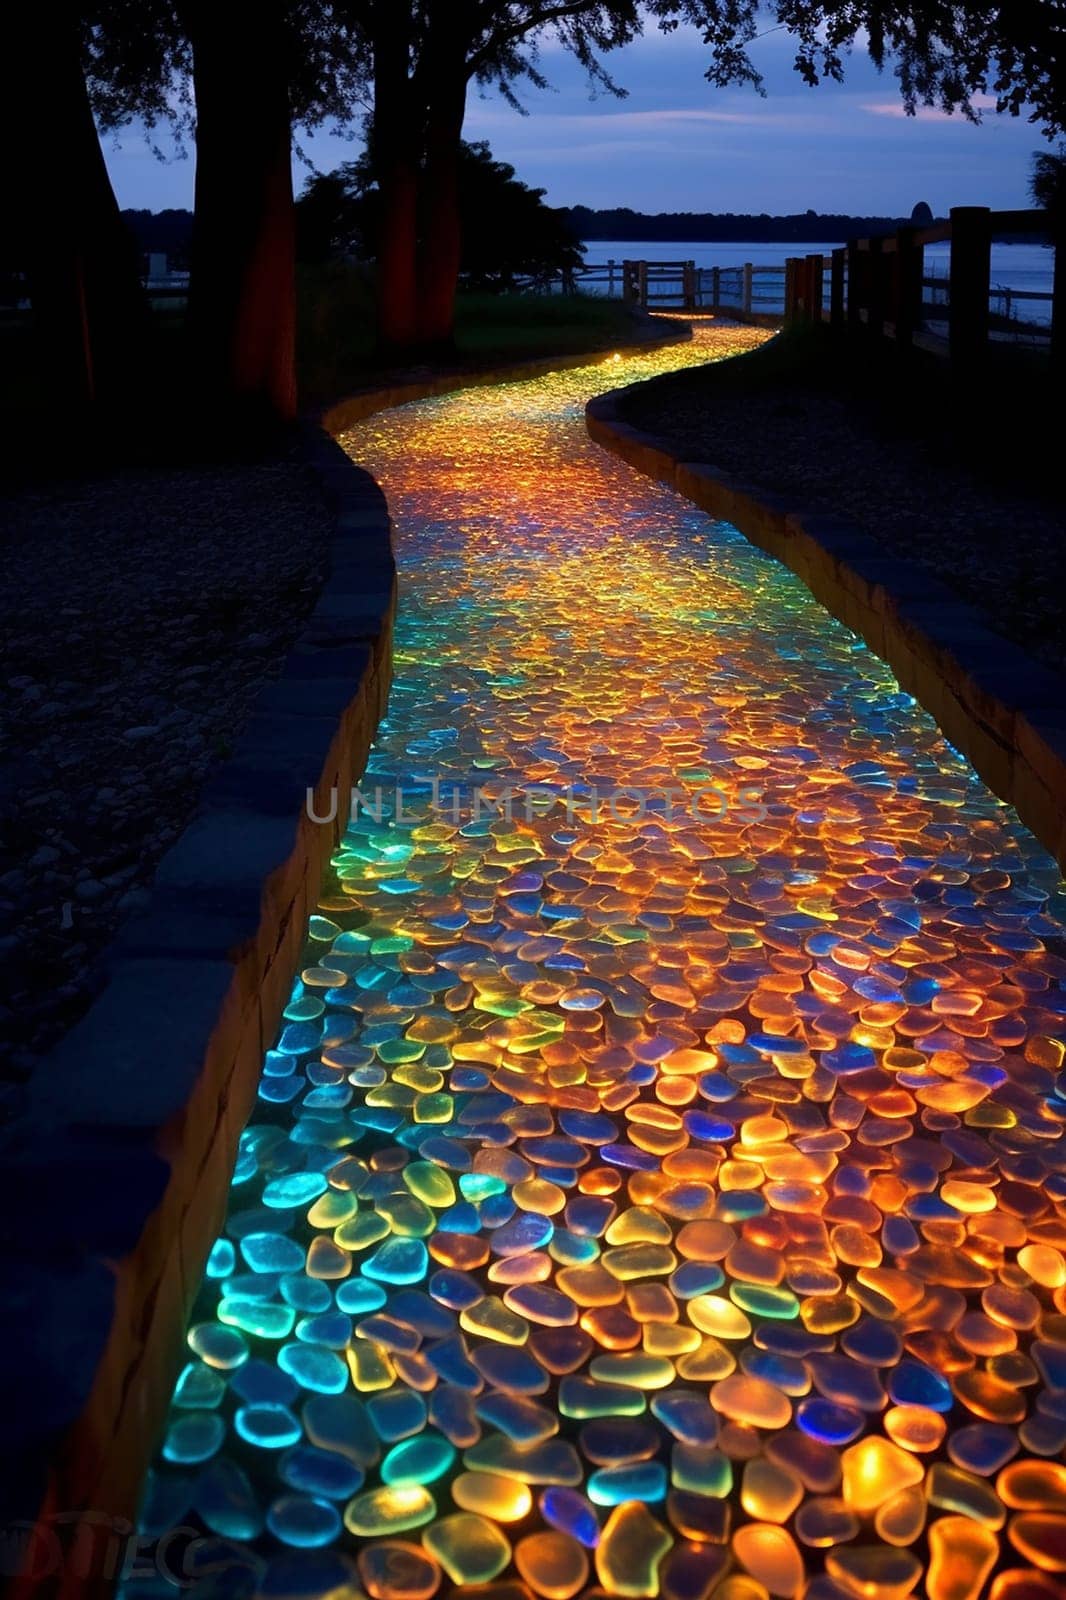 Colorful lights illuminate a winding path at night creating a magical atmosphere.